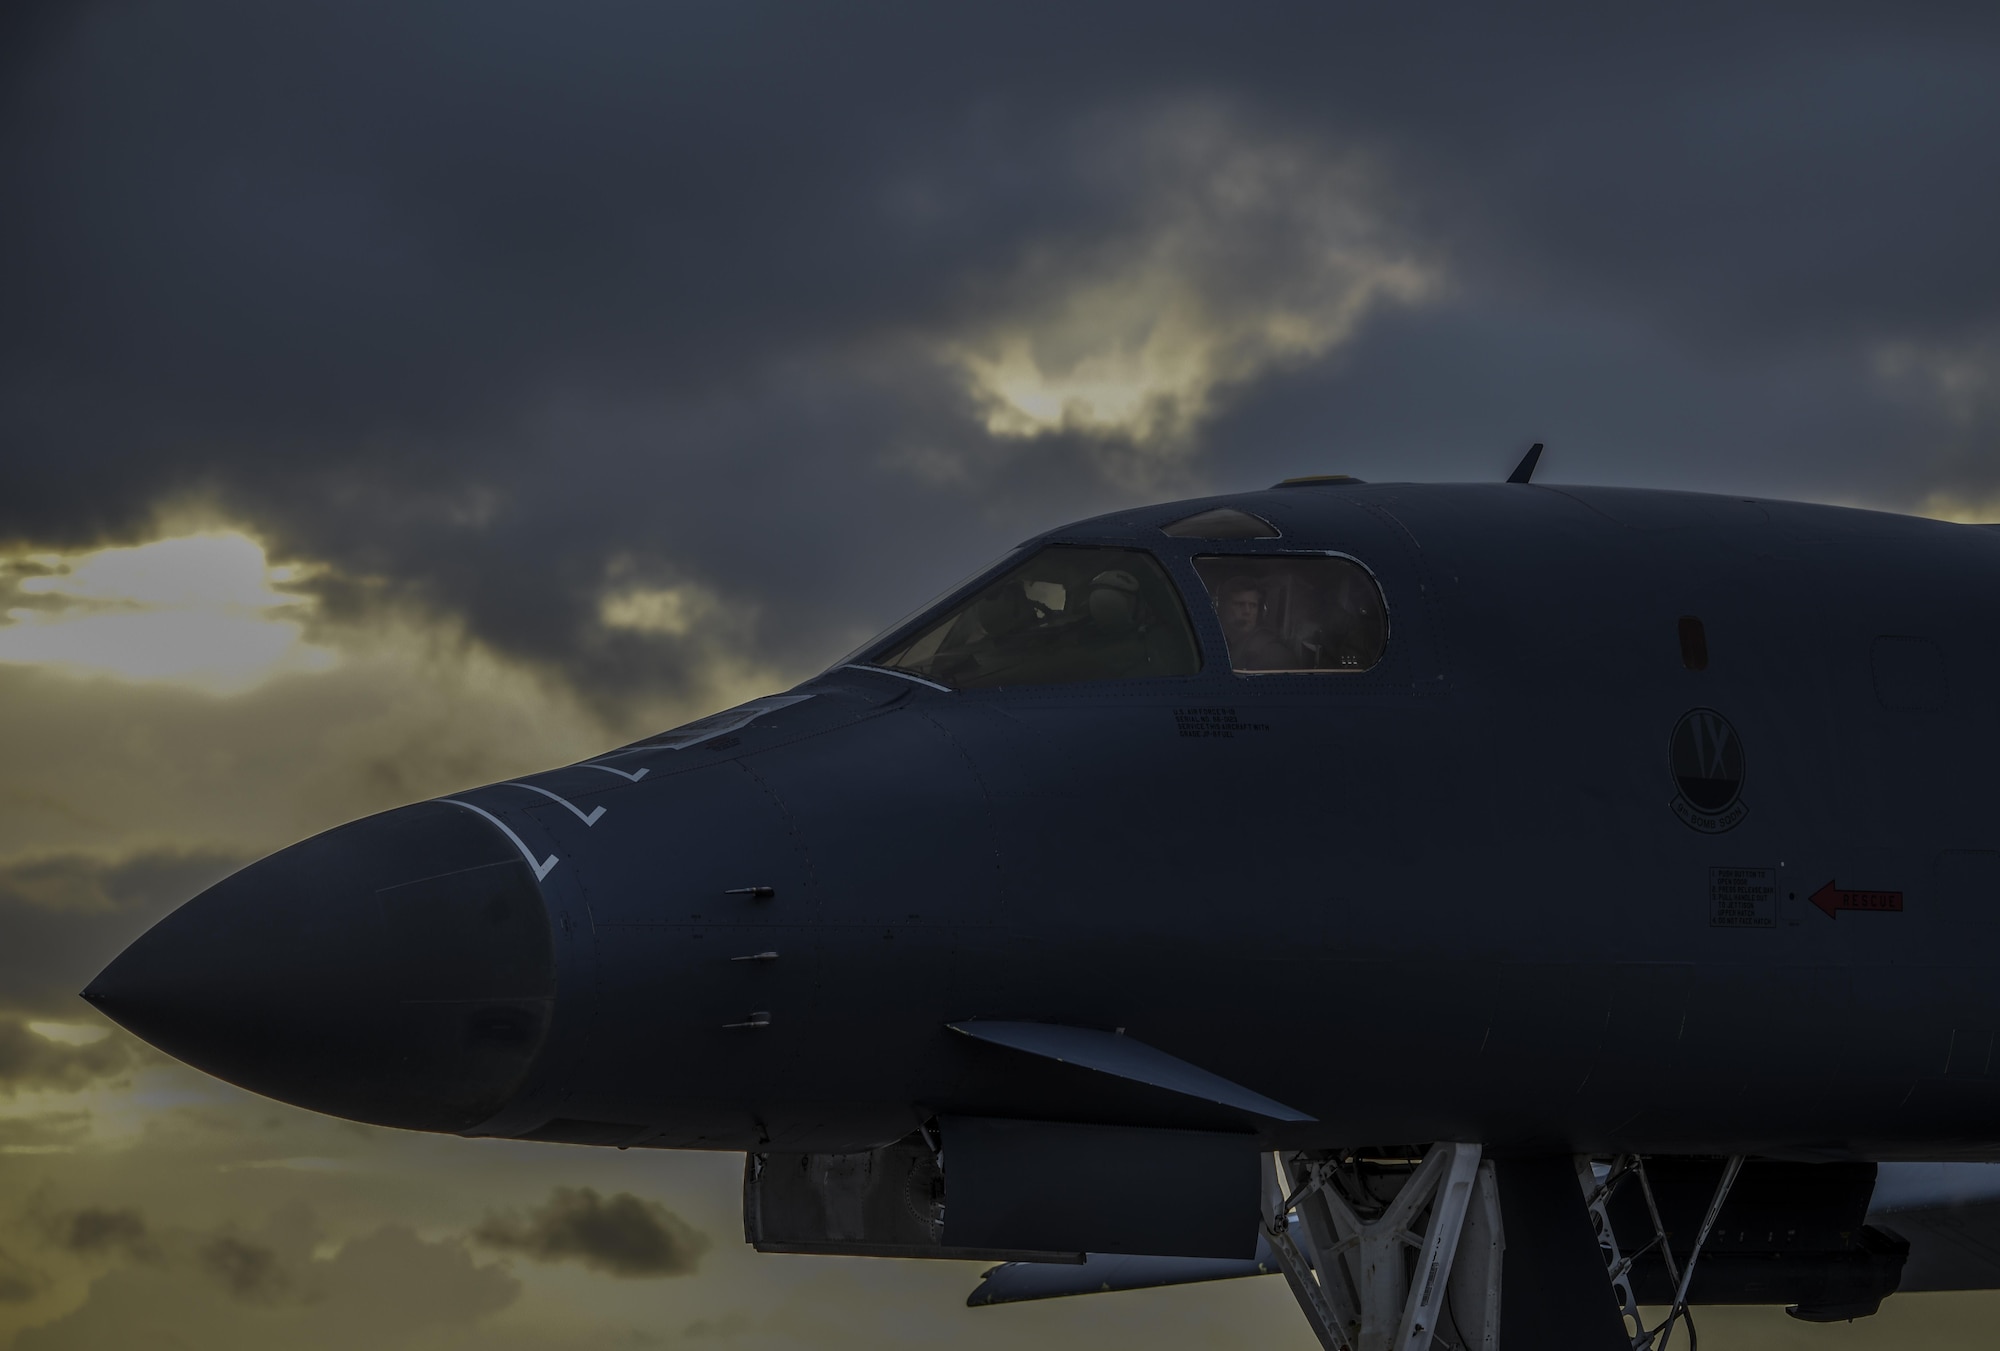 A U.S. Air Force B-1B Lancer assigned to the 9th Expeditionary Bomb Squadron, deployed from Dyess Air Force Base, Texas, prepares for take off from Andersen Air Force Base, Guam, to fly a bilateral mission with two Japan Air Self-Defense Force F-15’s over the East China Sea, July 6, 2017. The flight with Japan is a demonstration of the strength of the bilateral alliances between the United States and Japan, and the broadening bilateral cooperation and capability to defend against common regional threats. (U.S. Air Force photo/Tech. Sgt. Richard P. Ebensberger)